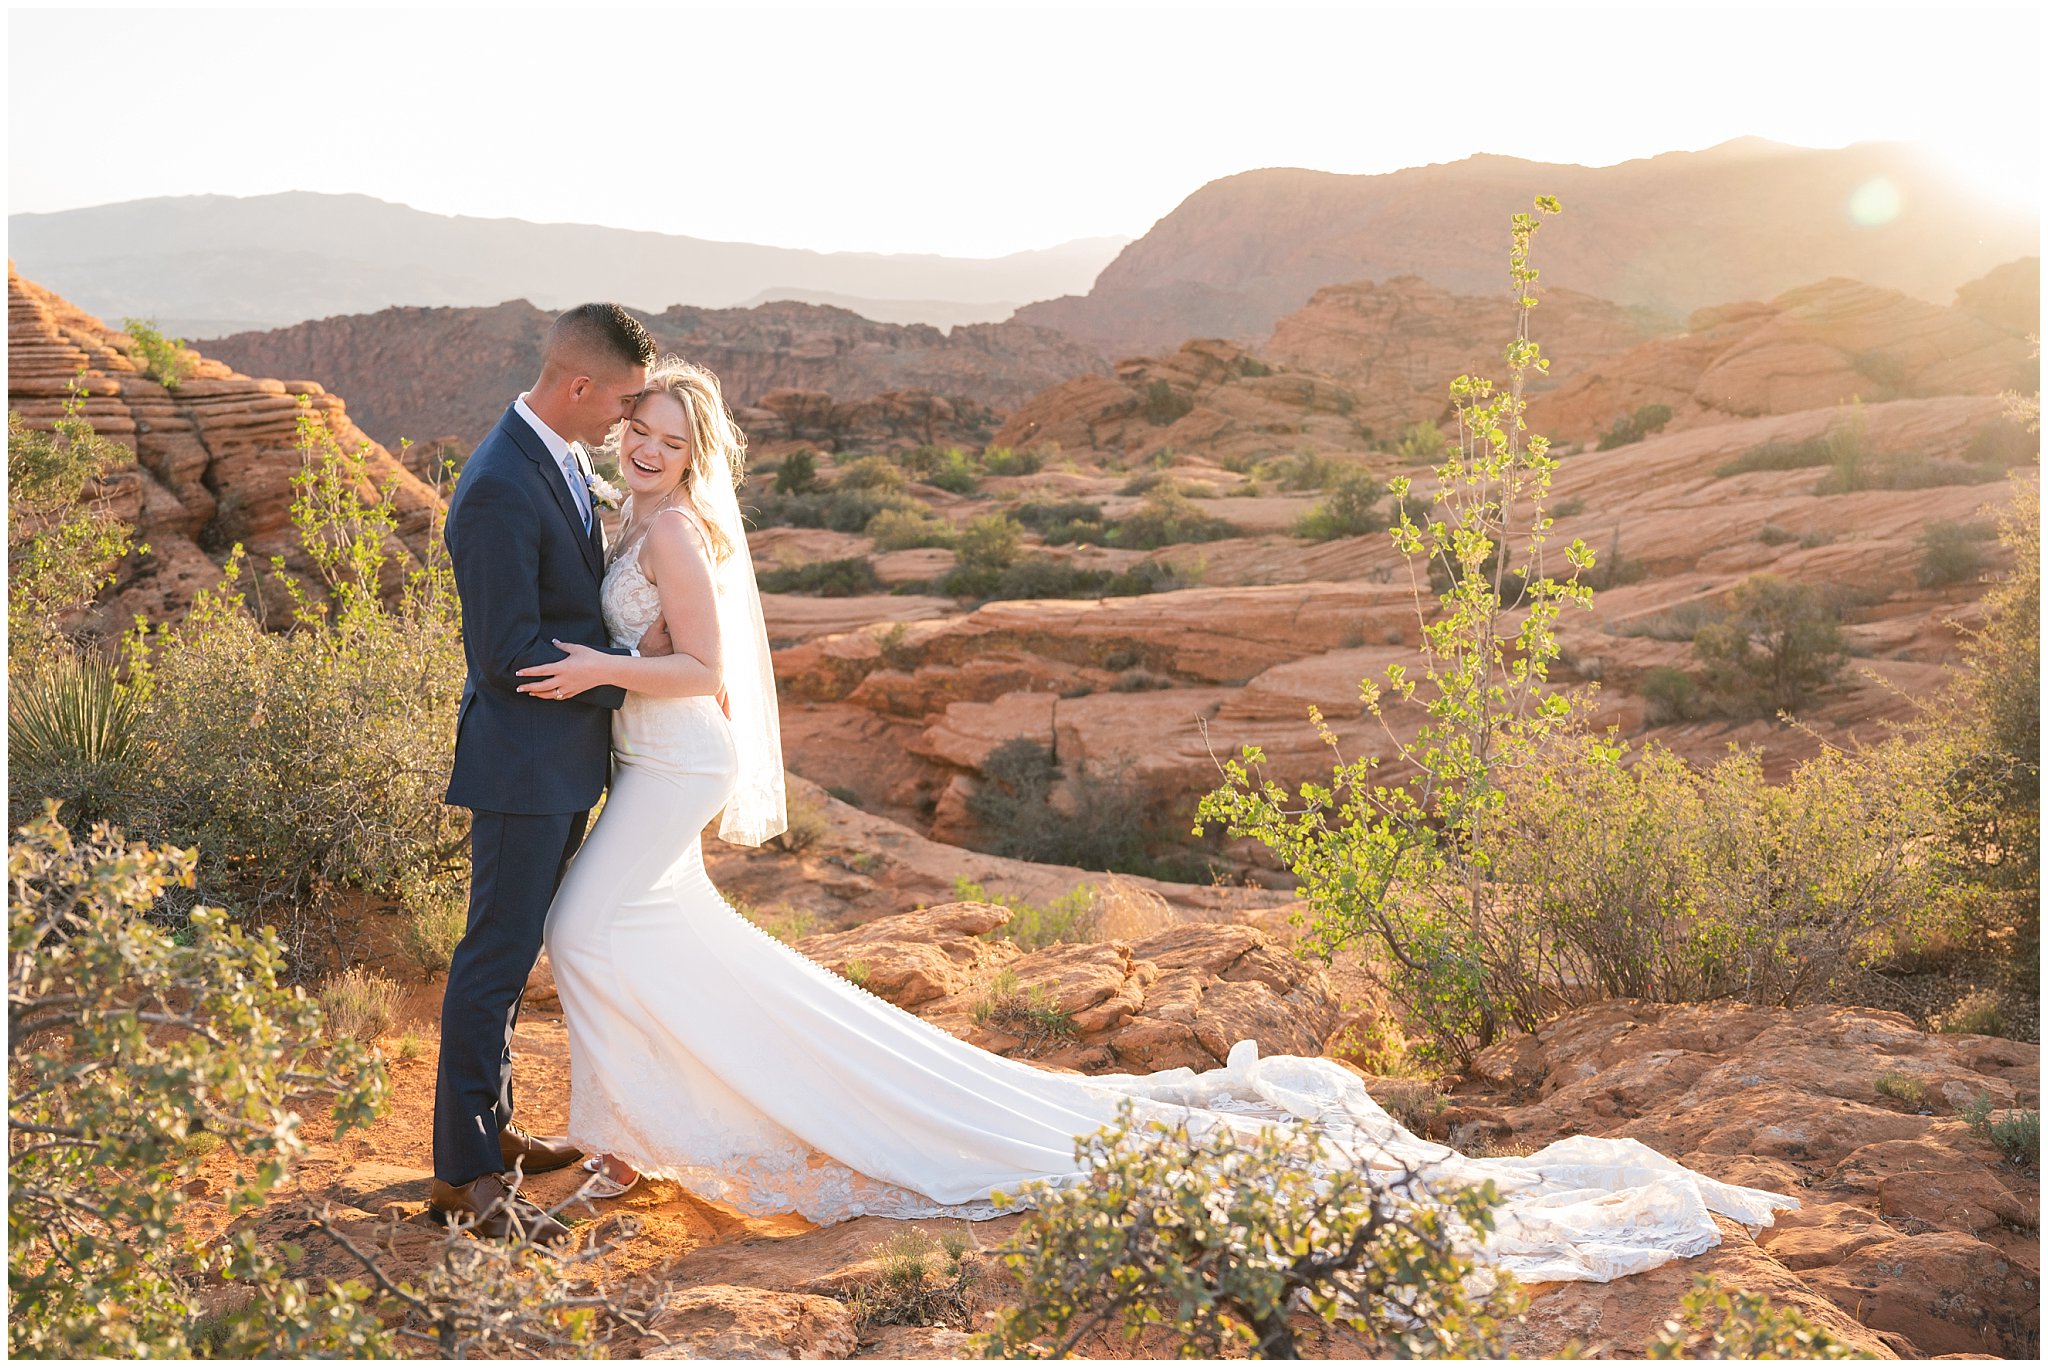 Wedding in the red rocks of southern Utah. Bride and groom wedding day portraits in the red rock.